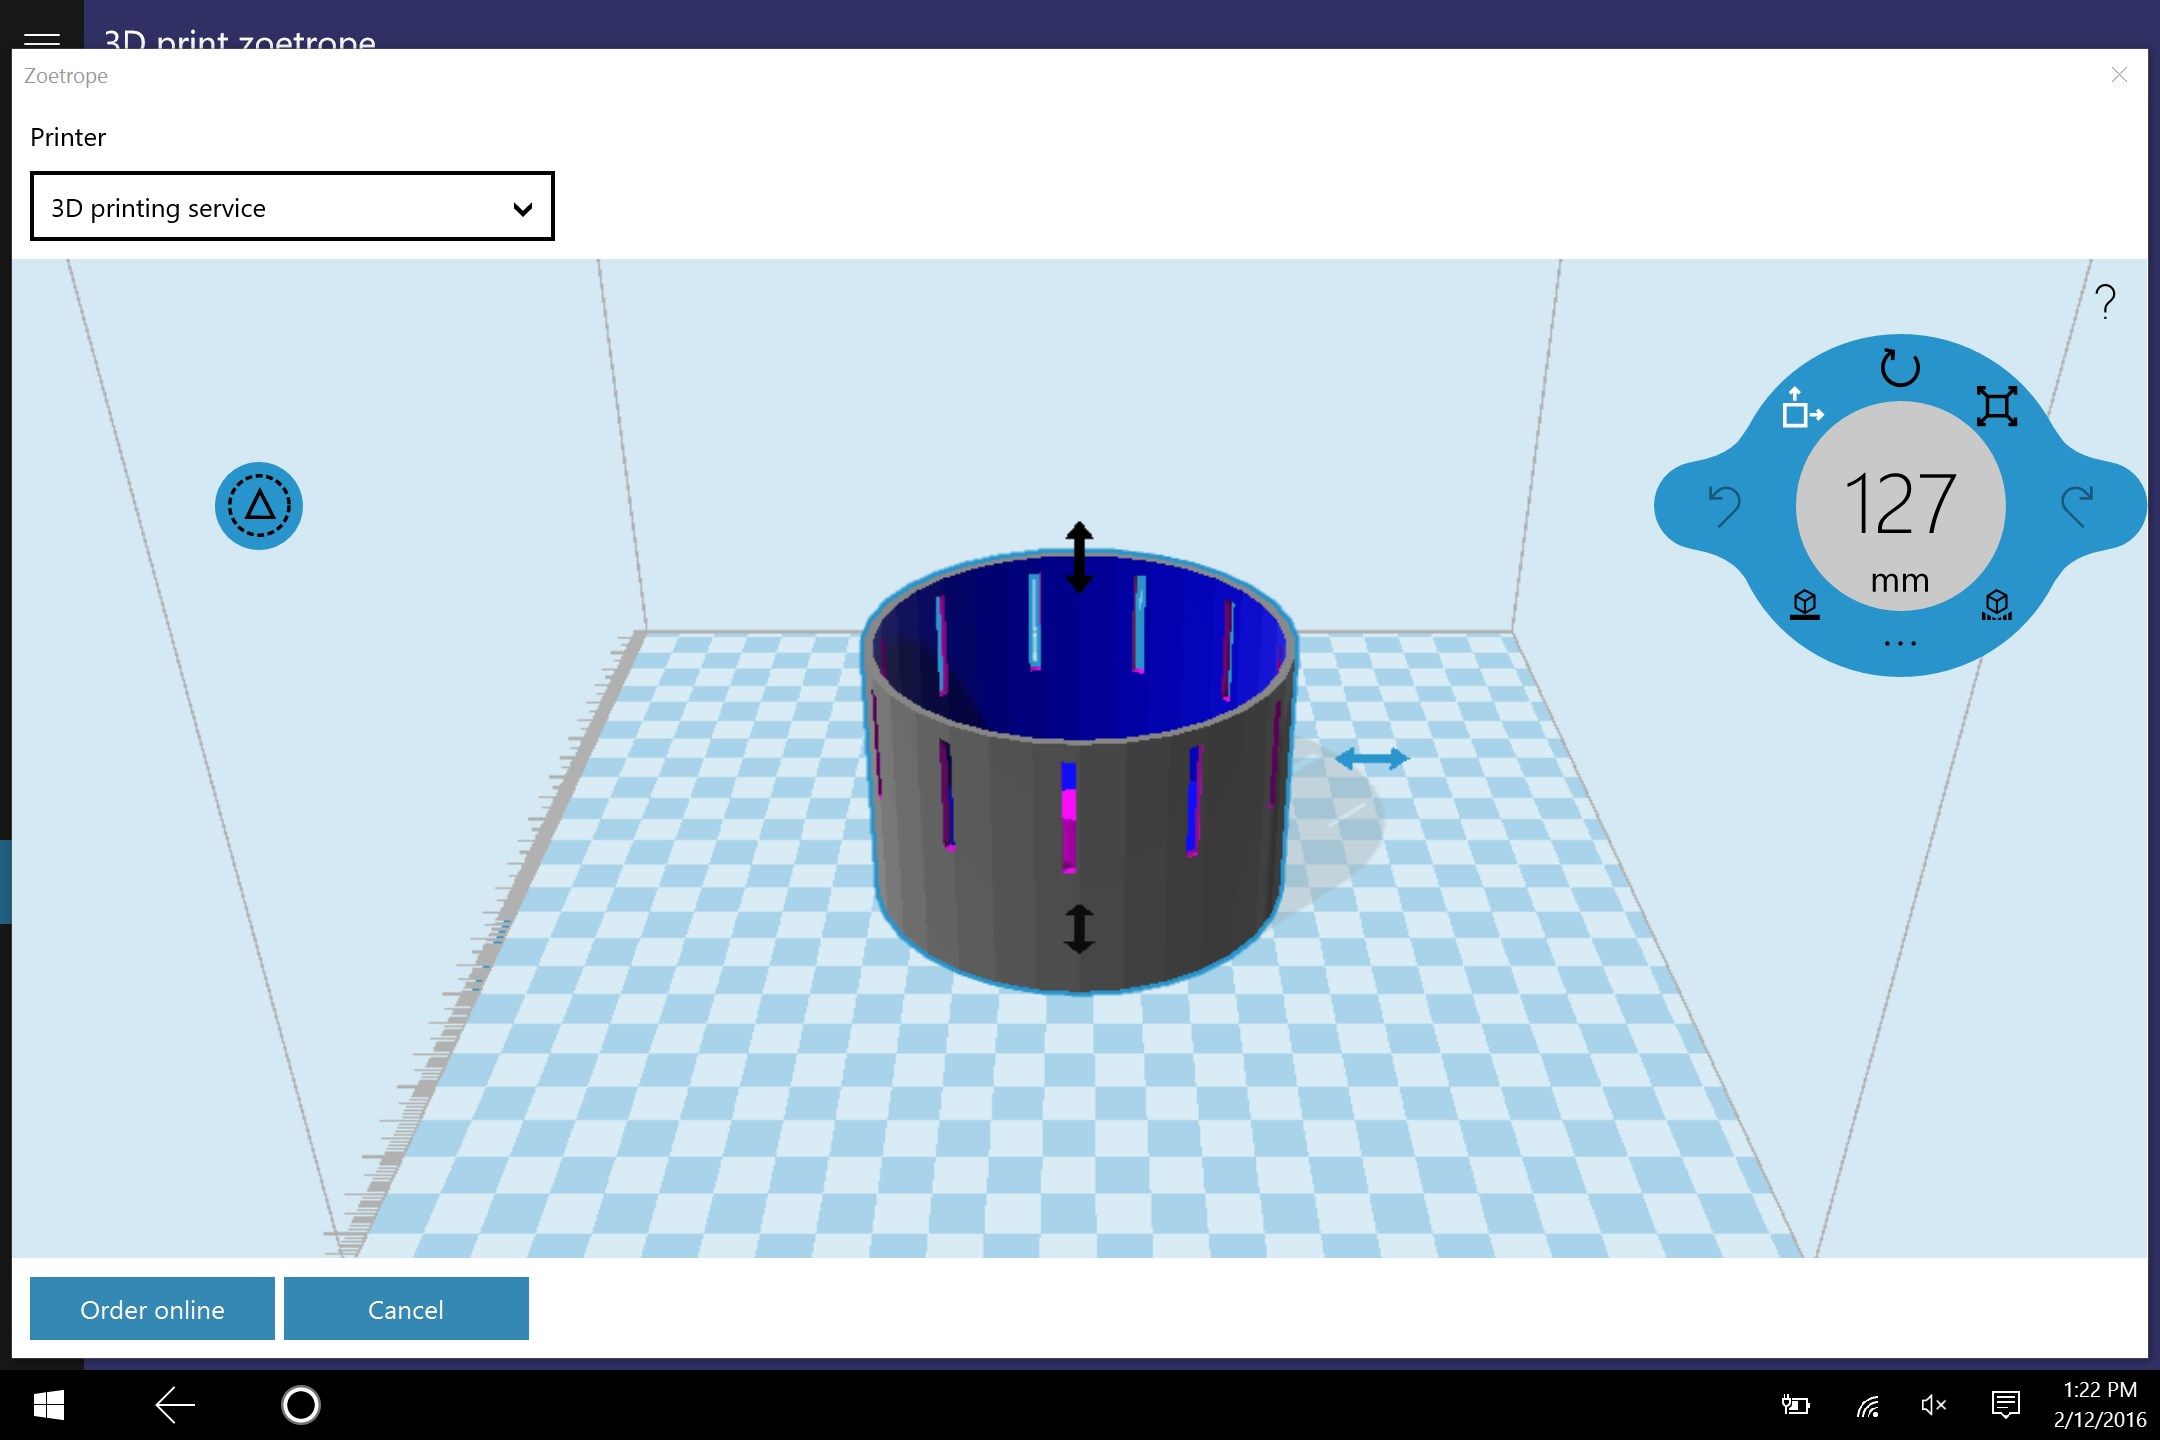 Integration with the standard 3D print workflow in Windows 10.